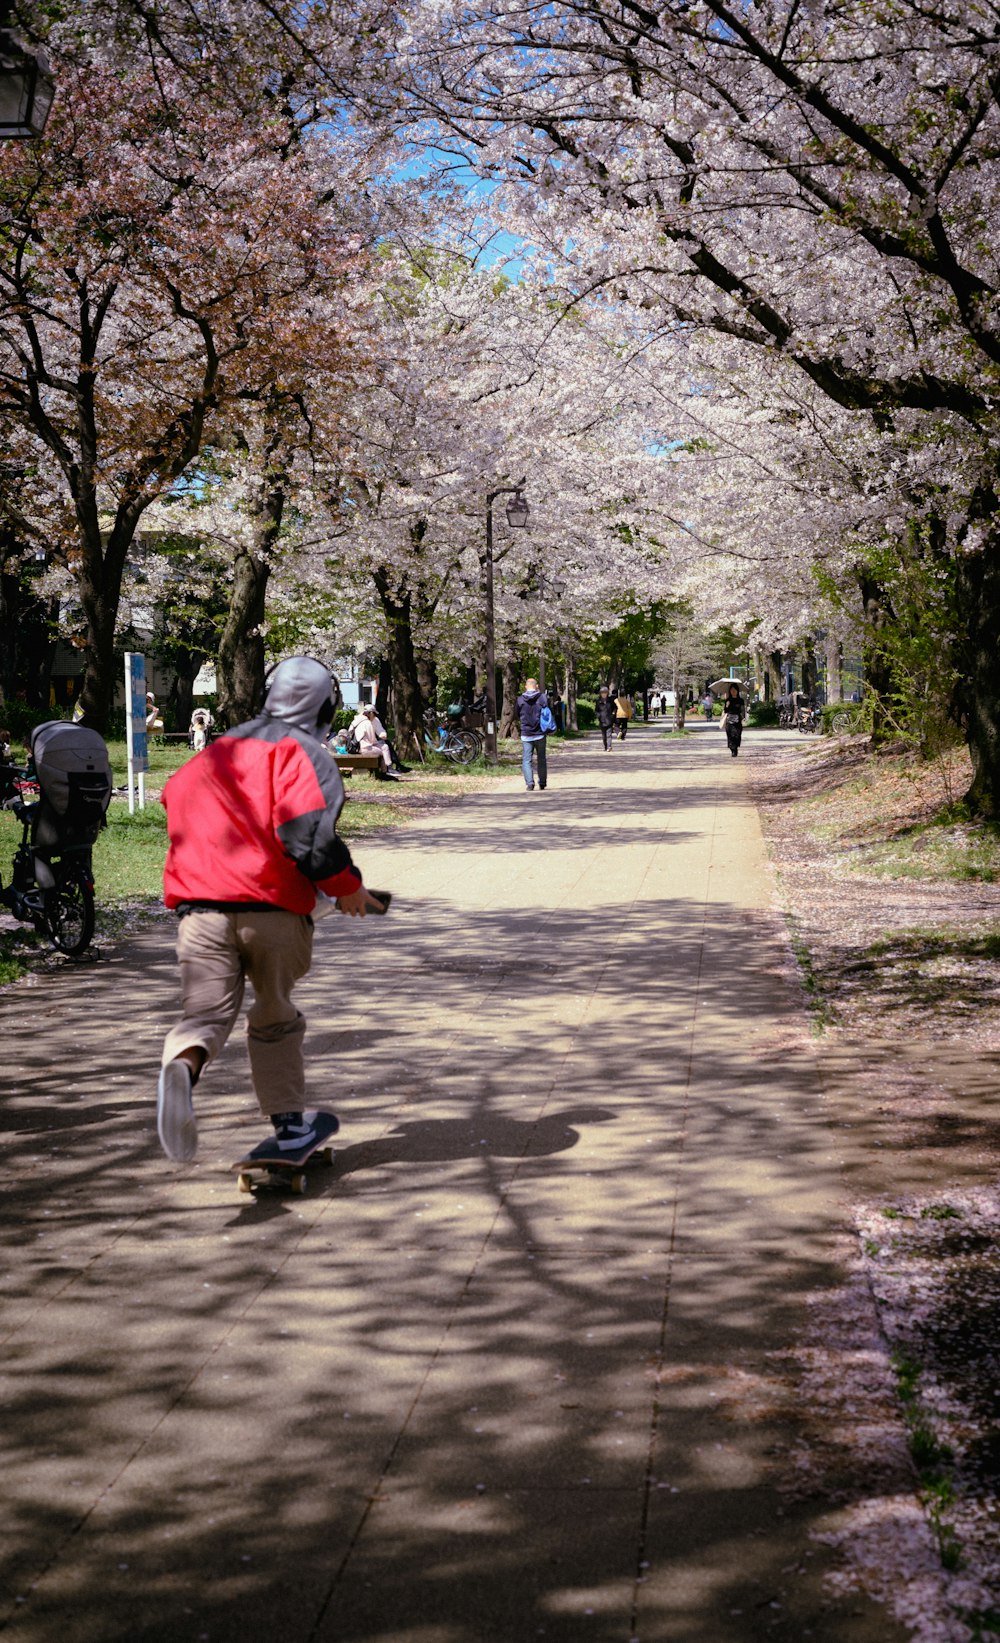 a person in a red jacket is skateboarding down a path